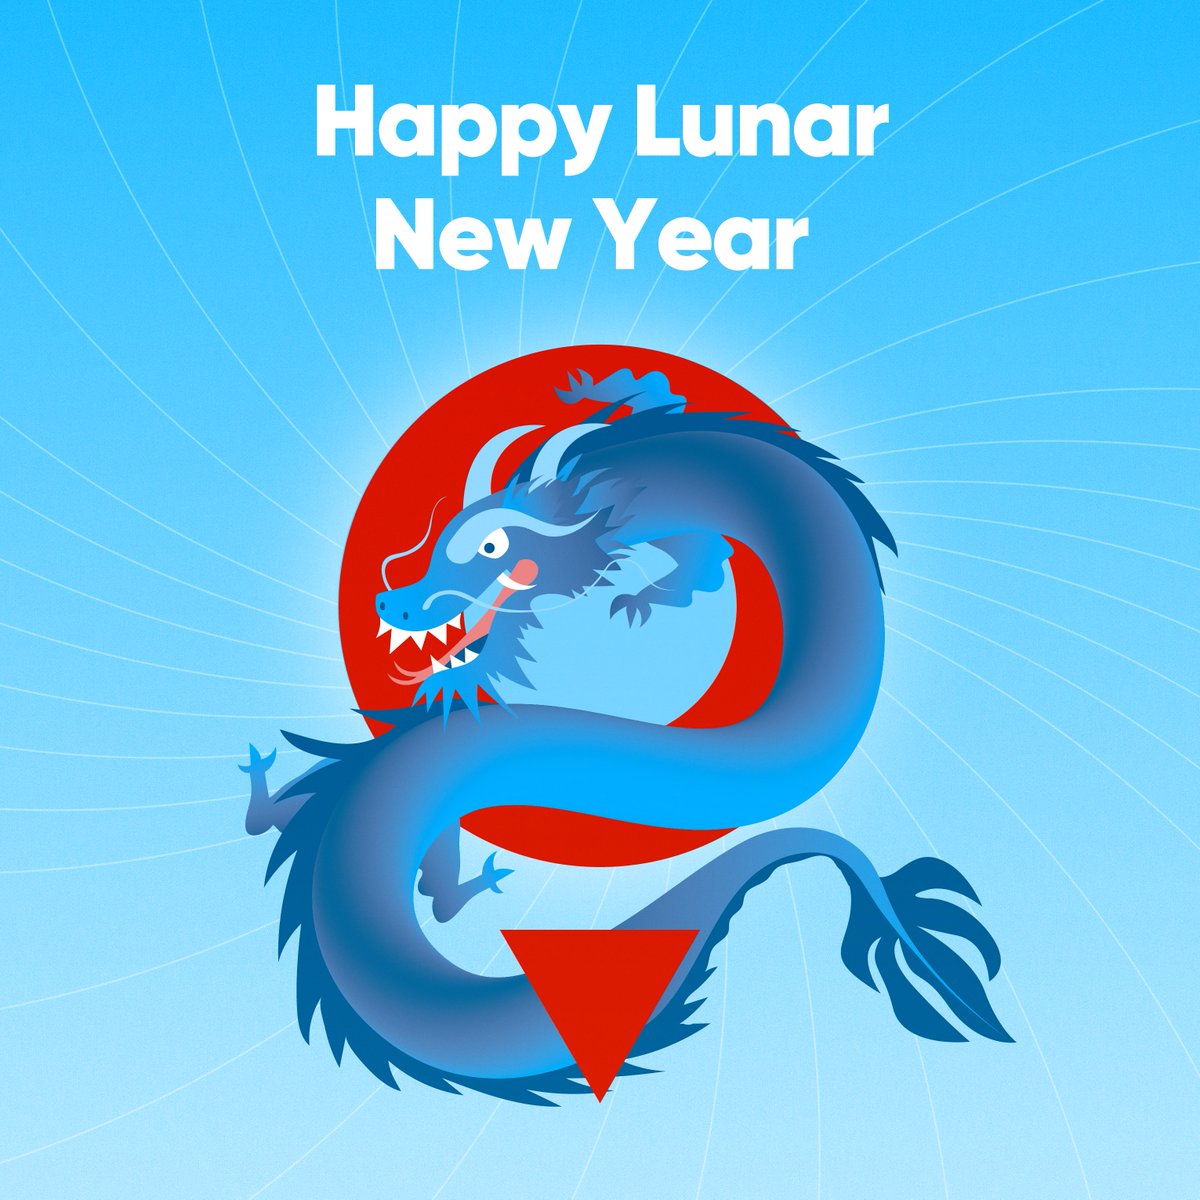 Happy #LunarNewYear! May the #YearOfTheDragon bring you good health, happiness and good luck. 🐲💫